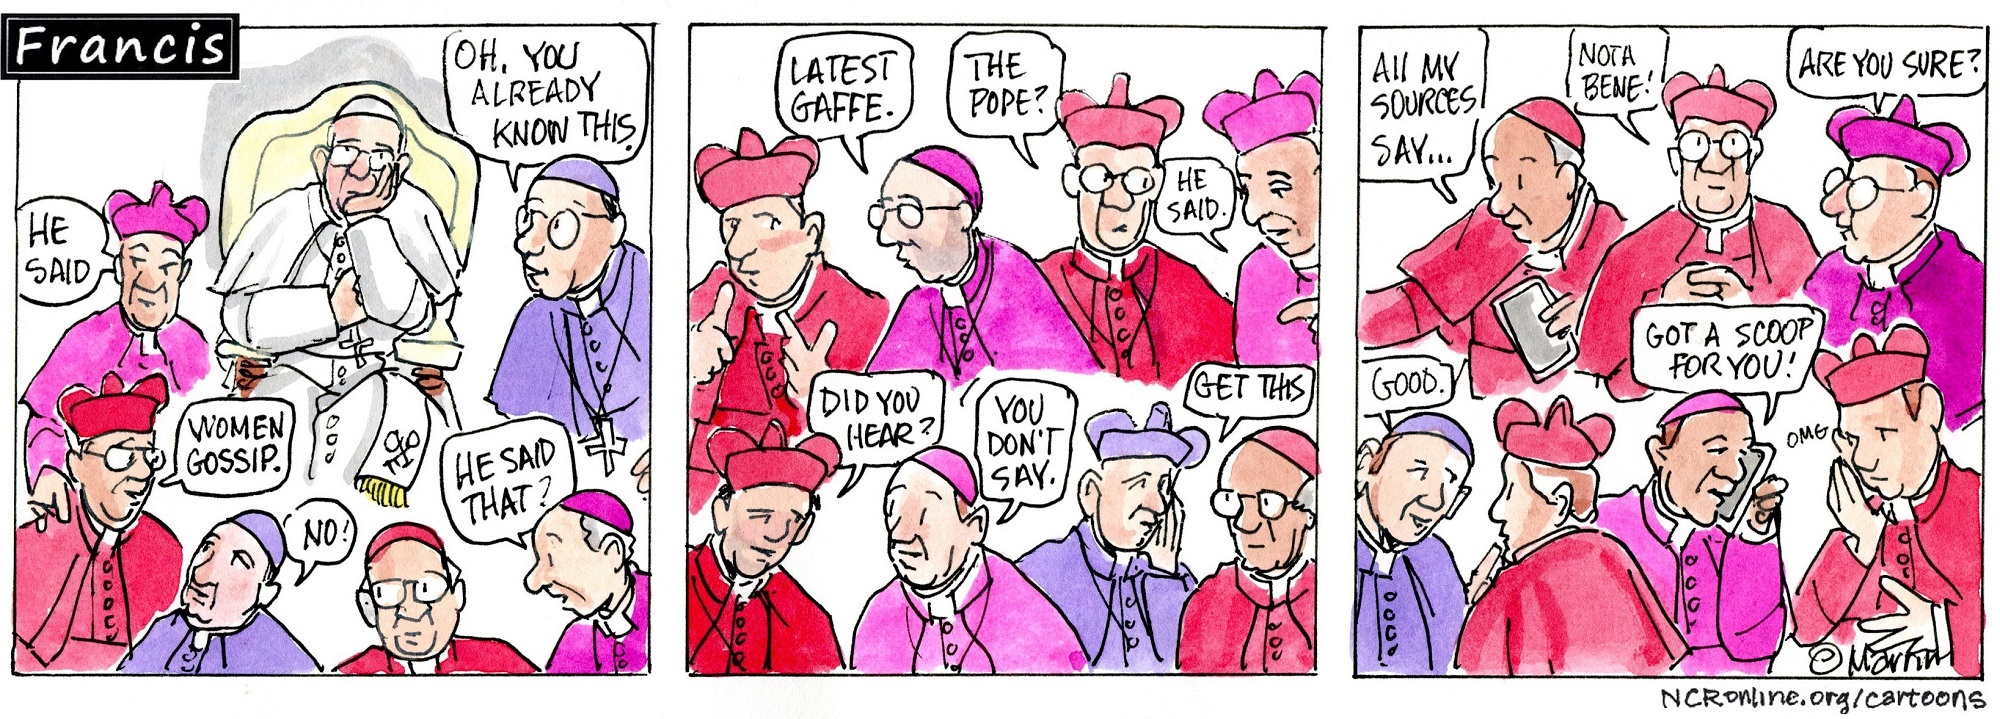 Francis, the comic strip: Francis is surrounded by gossip.